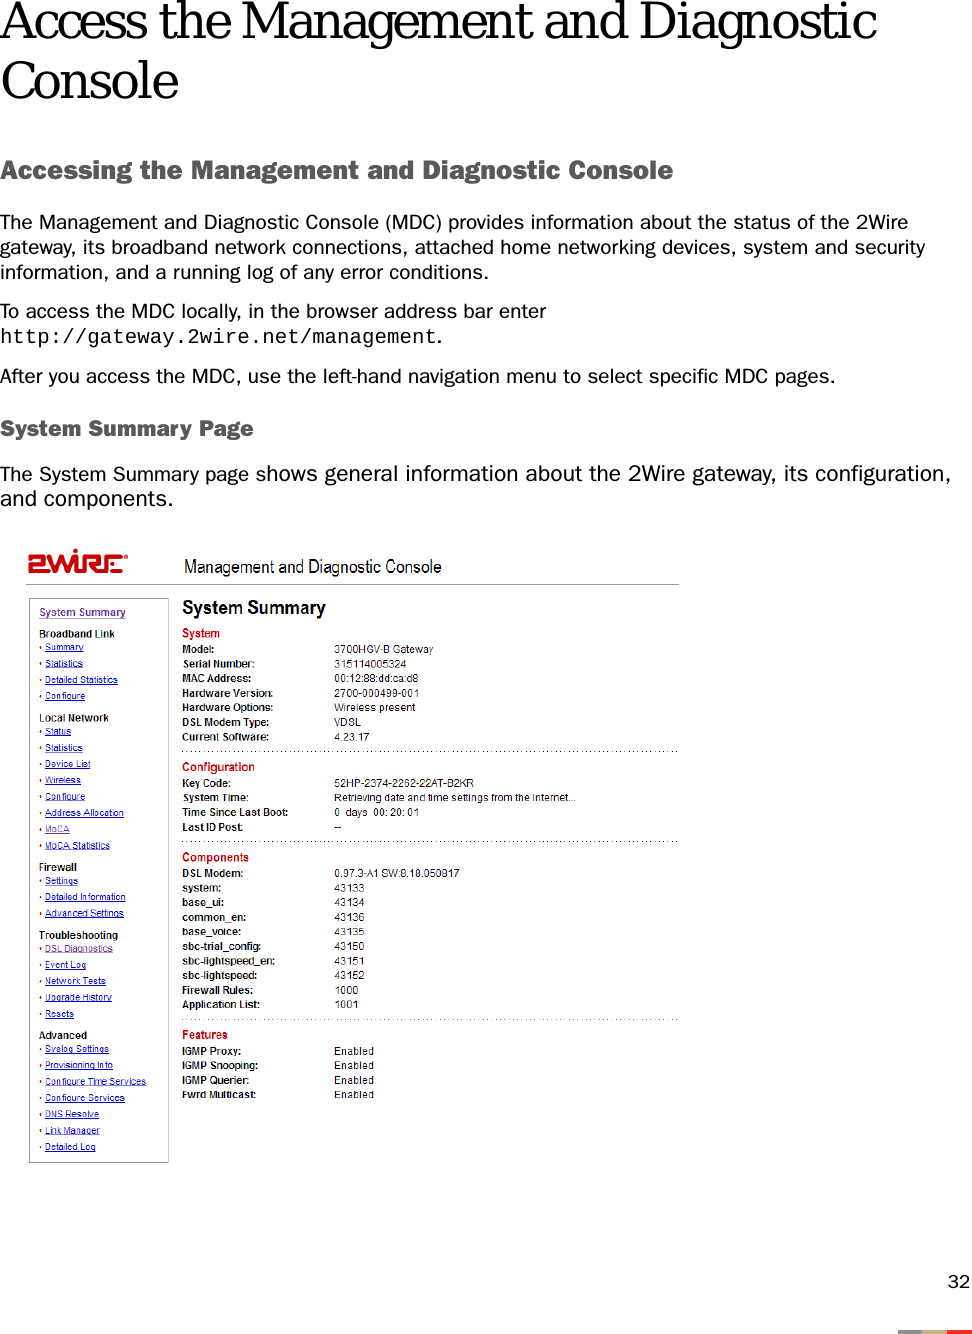 32Access the Management and Diagnostic ConsoleAccessing the Management and Diagnostic ConsoleThe Management and Diagnostic Console (MDC) provides information about the status of the 2Wire gateway, its broadband network connections, attached home networking devices, system and security information, and a running log of any error conditions.To access the MDC locally, in the browser address bar enter http://gateway.2wire.net/management.After you access the MDC, use the left-hand navigation menu to select specific MDC pages.System Summary PageThe System Summary page shows general information about the 2Wire gateway, its configuration, and components.